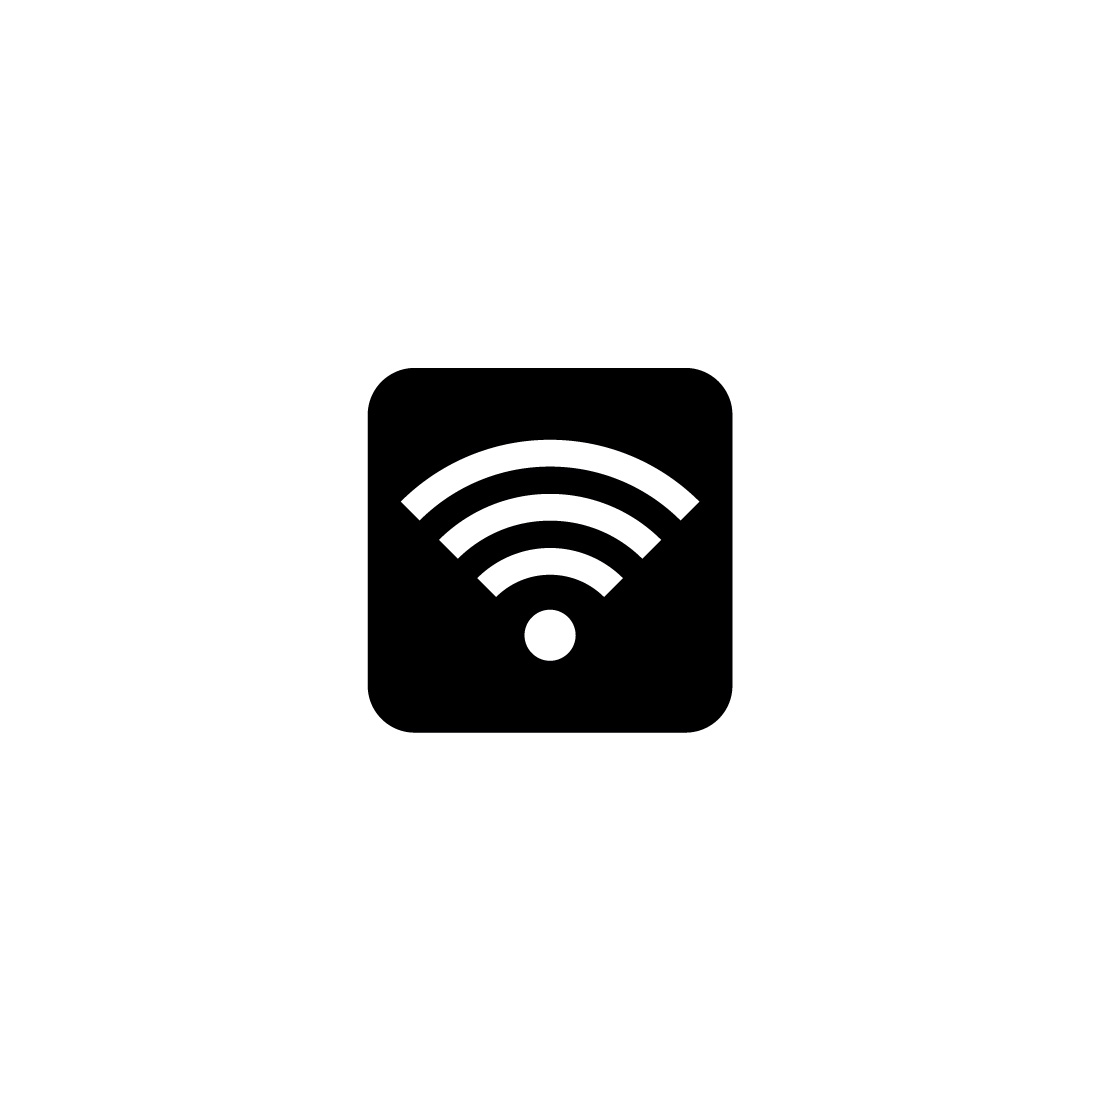 Wifi wireless internet signal flat icon for apps preview image.